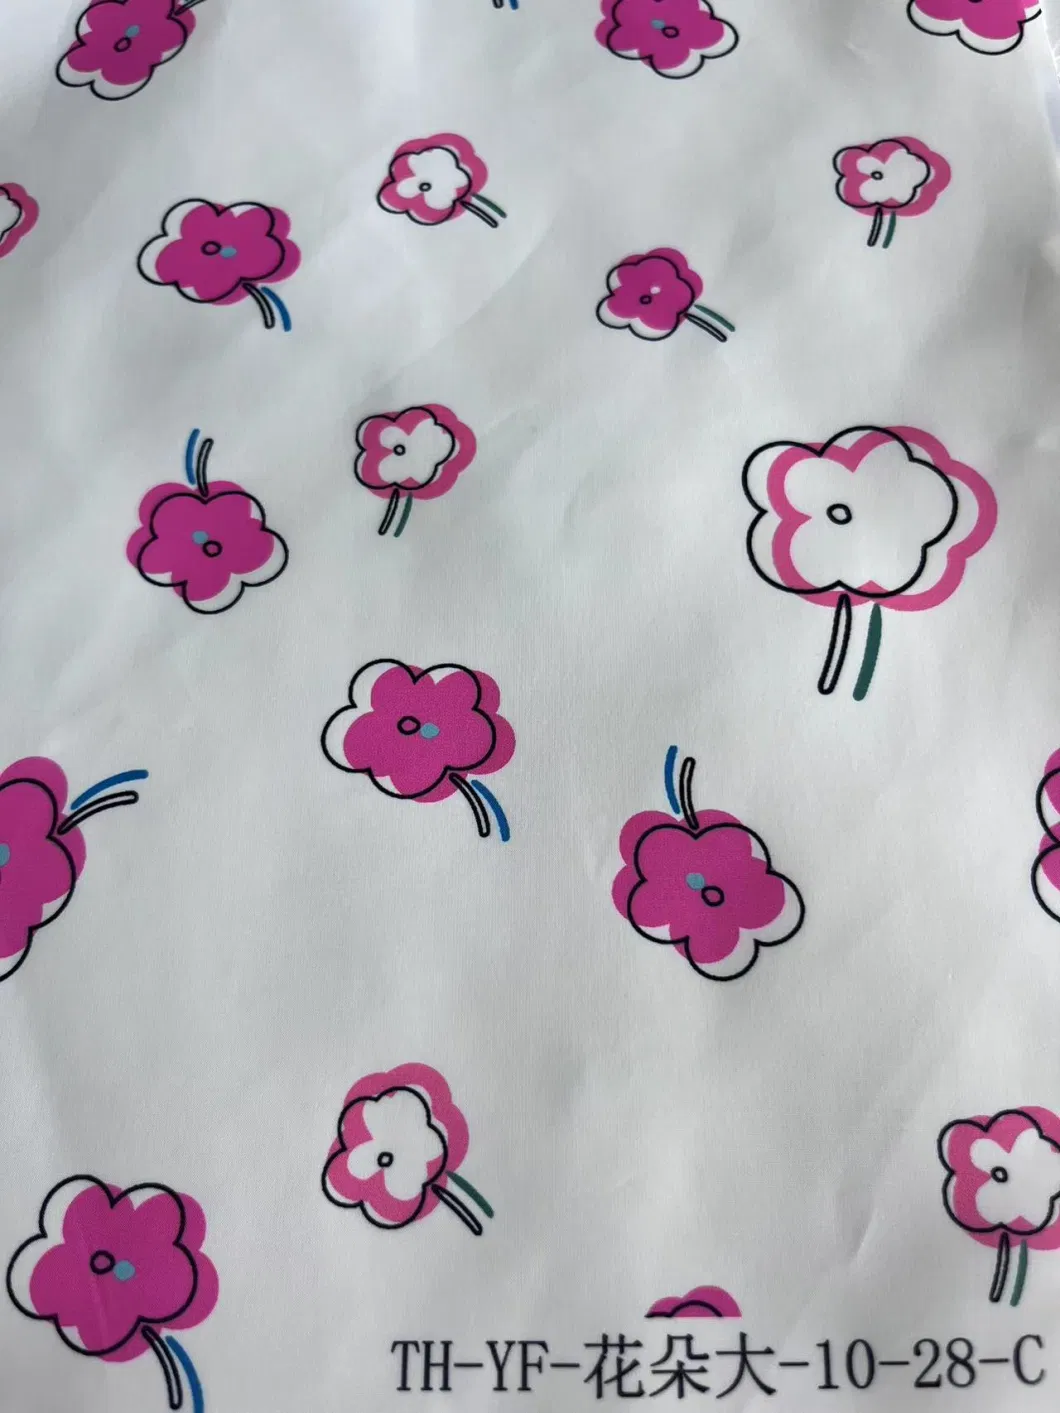 The Double Image Flowers Digital Printed Polyester Fabric for Kids